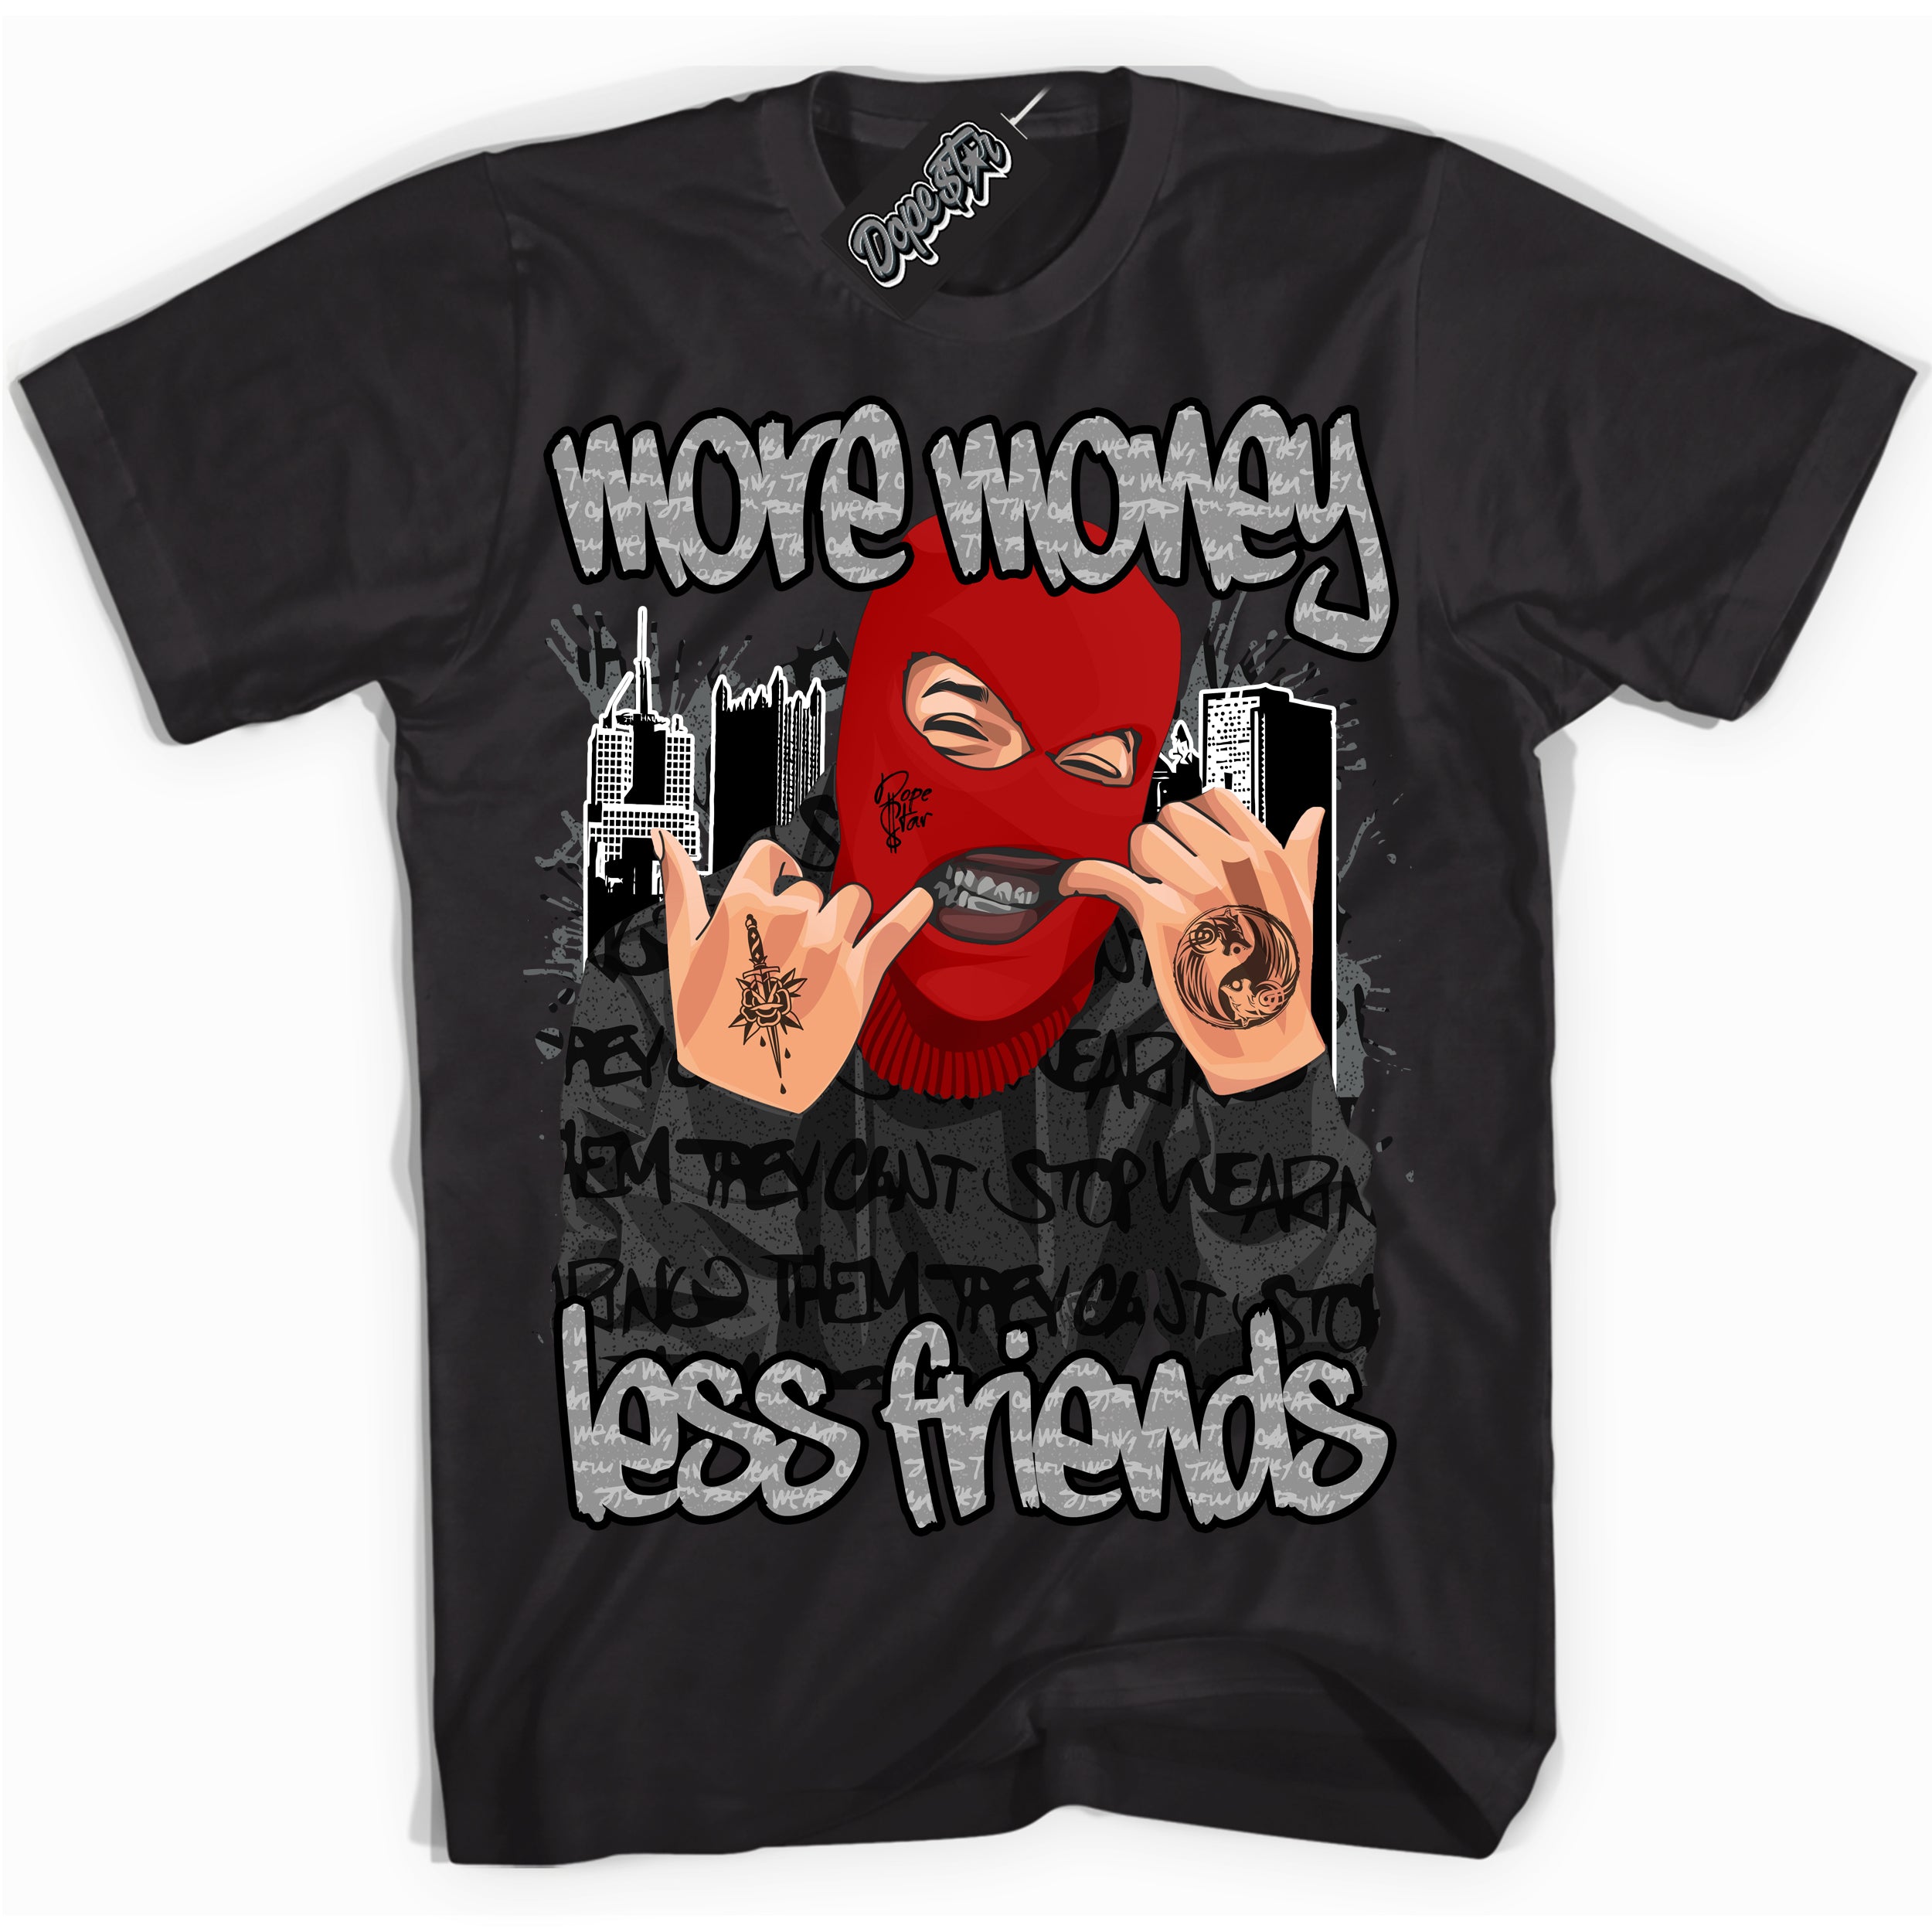 Cool Black Shirt with “ More Money Less Friends ” design that perfectly matches Rebellionaire 1s Sneakers.